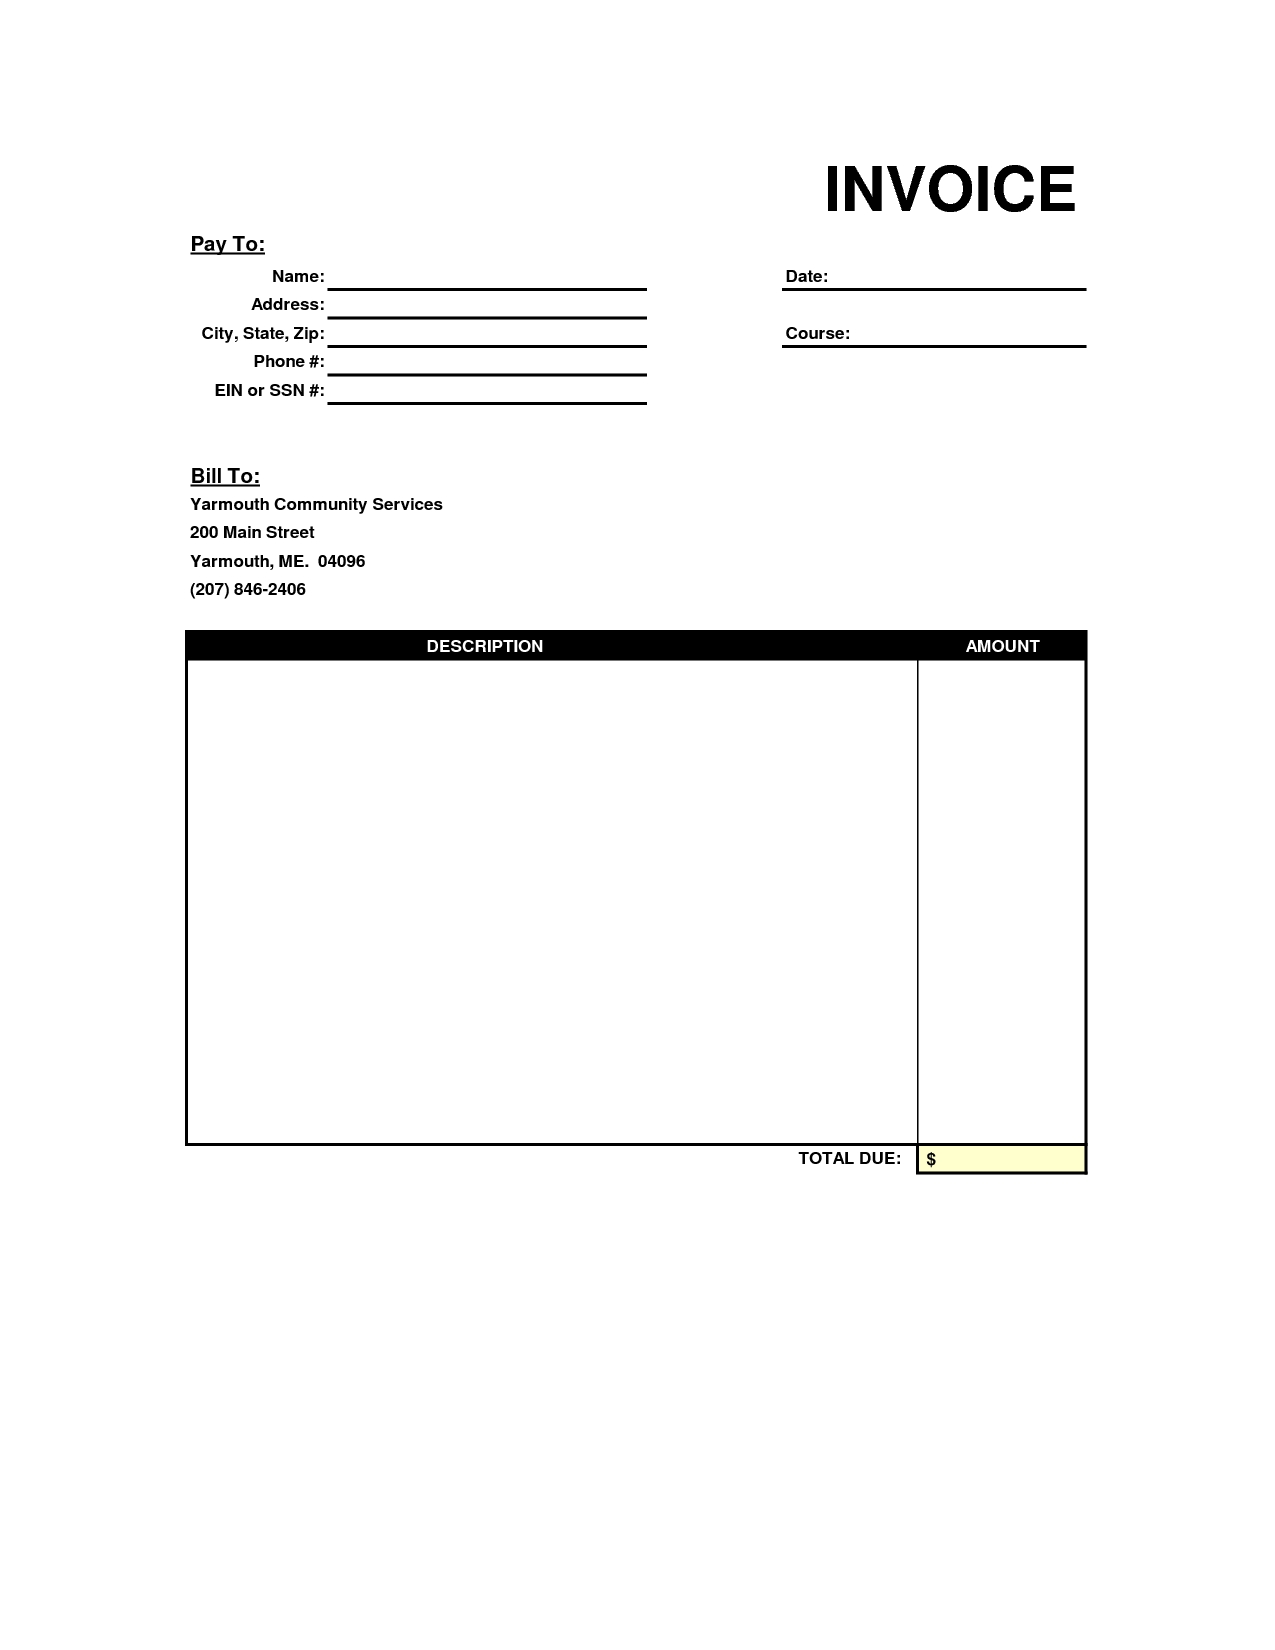 blank invoice template blank invoice invoice format template